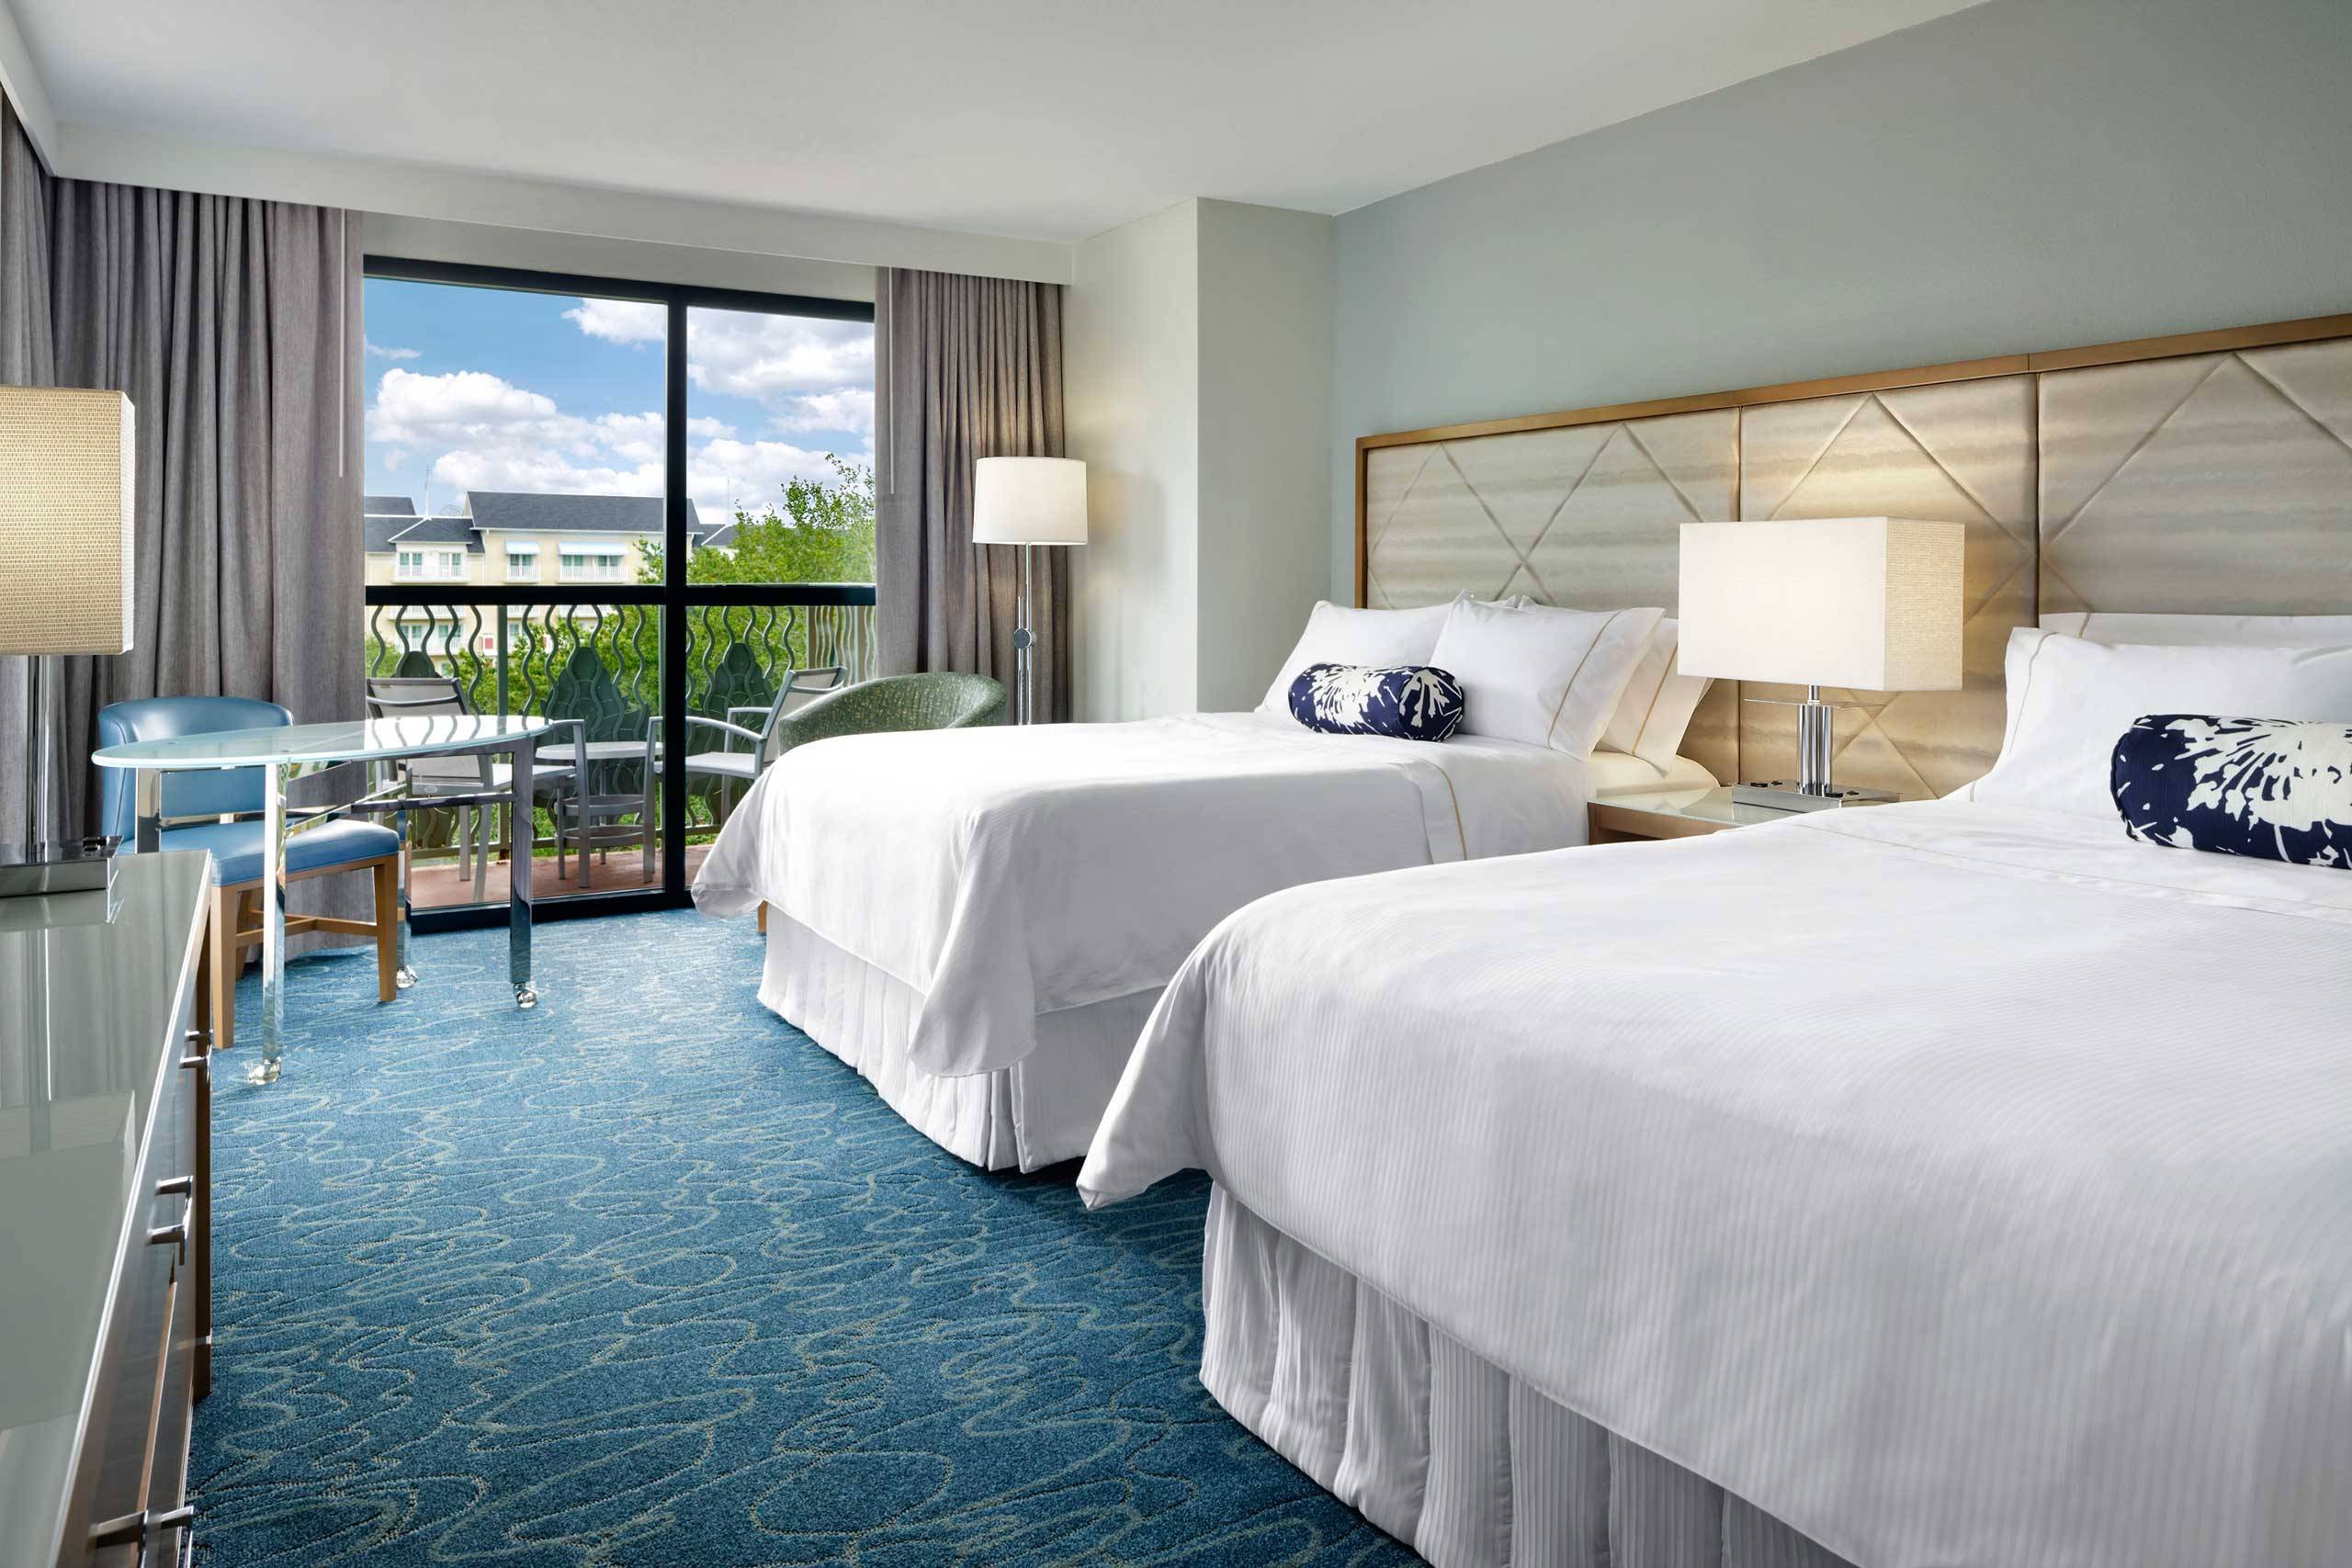 PHOTO - First look at the newly renovated Grand Deluxe Guest Rooms at the Walt Disney World Swan and Dolphin